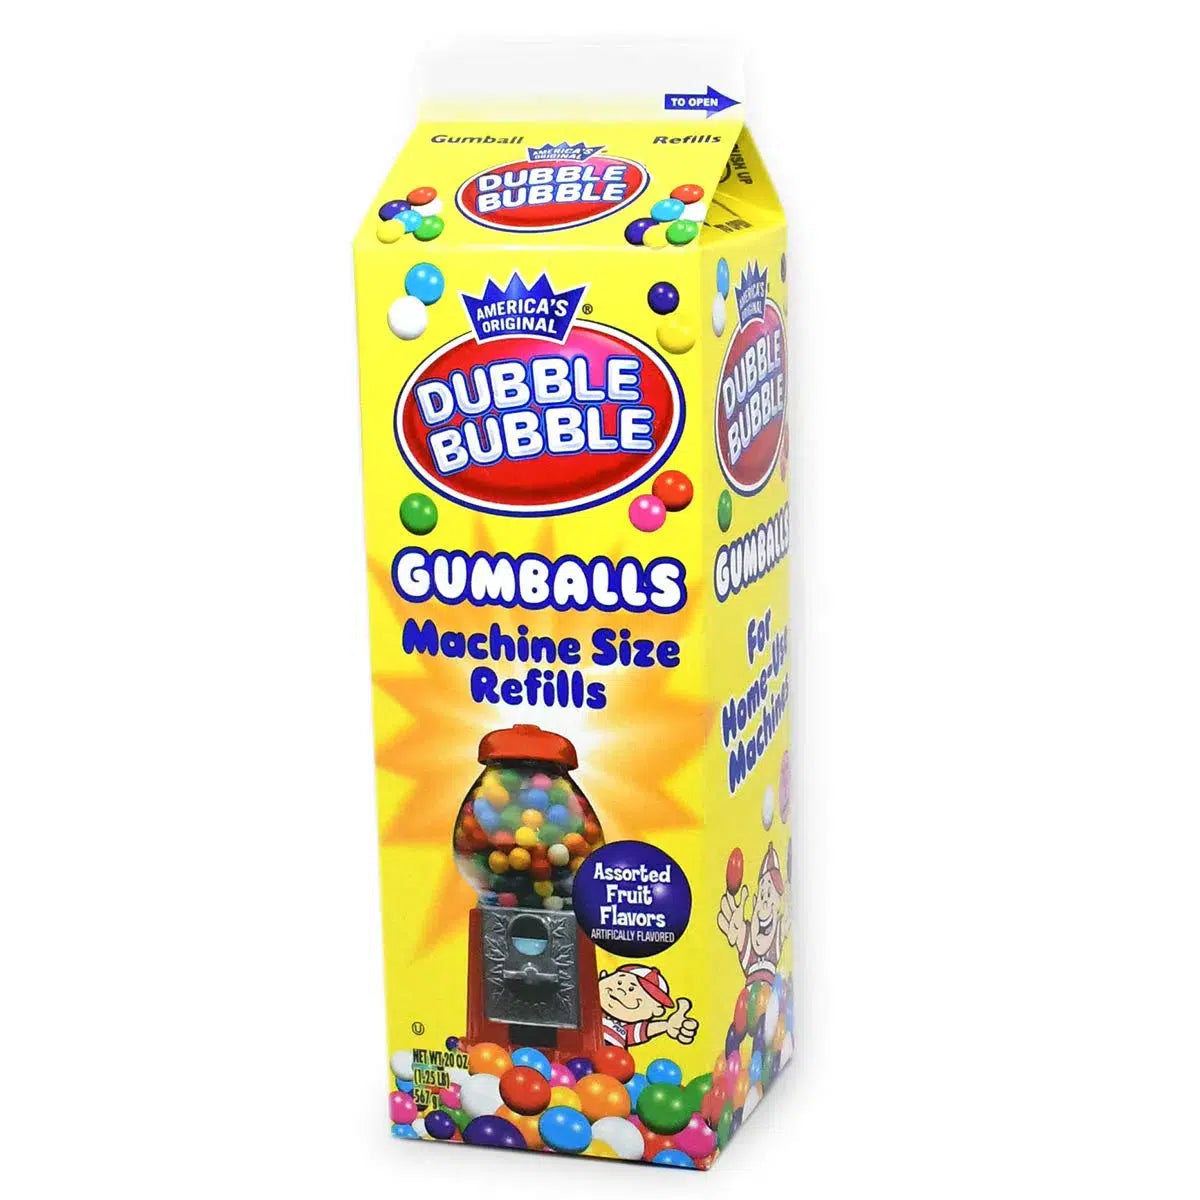 Charms-Dubble Bubble Gumballs Refill for Machines 20 oz. Box-21-Single-Legacy Toys